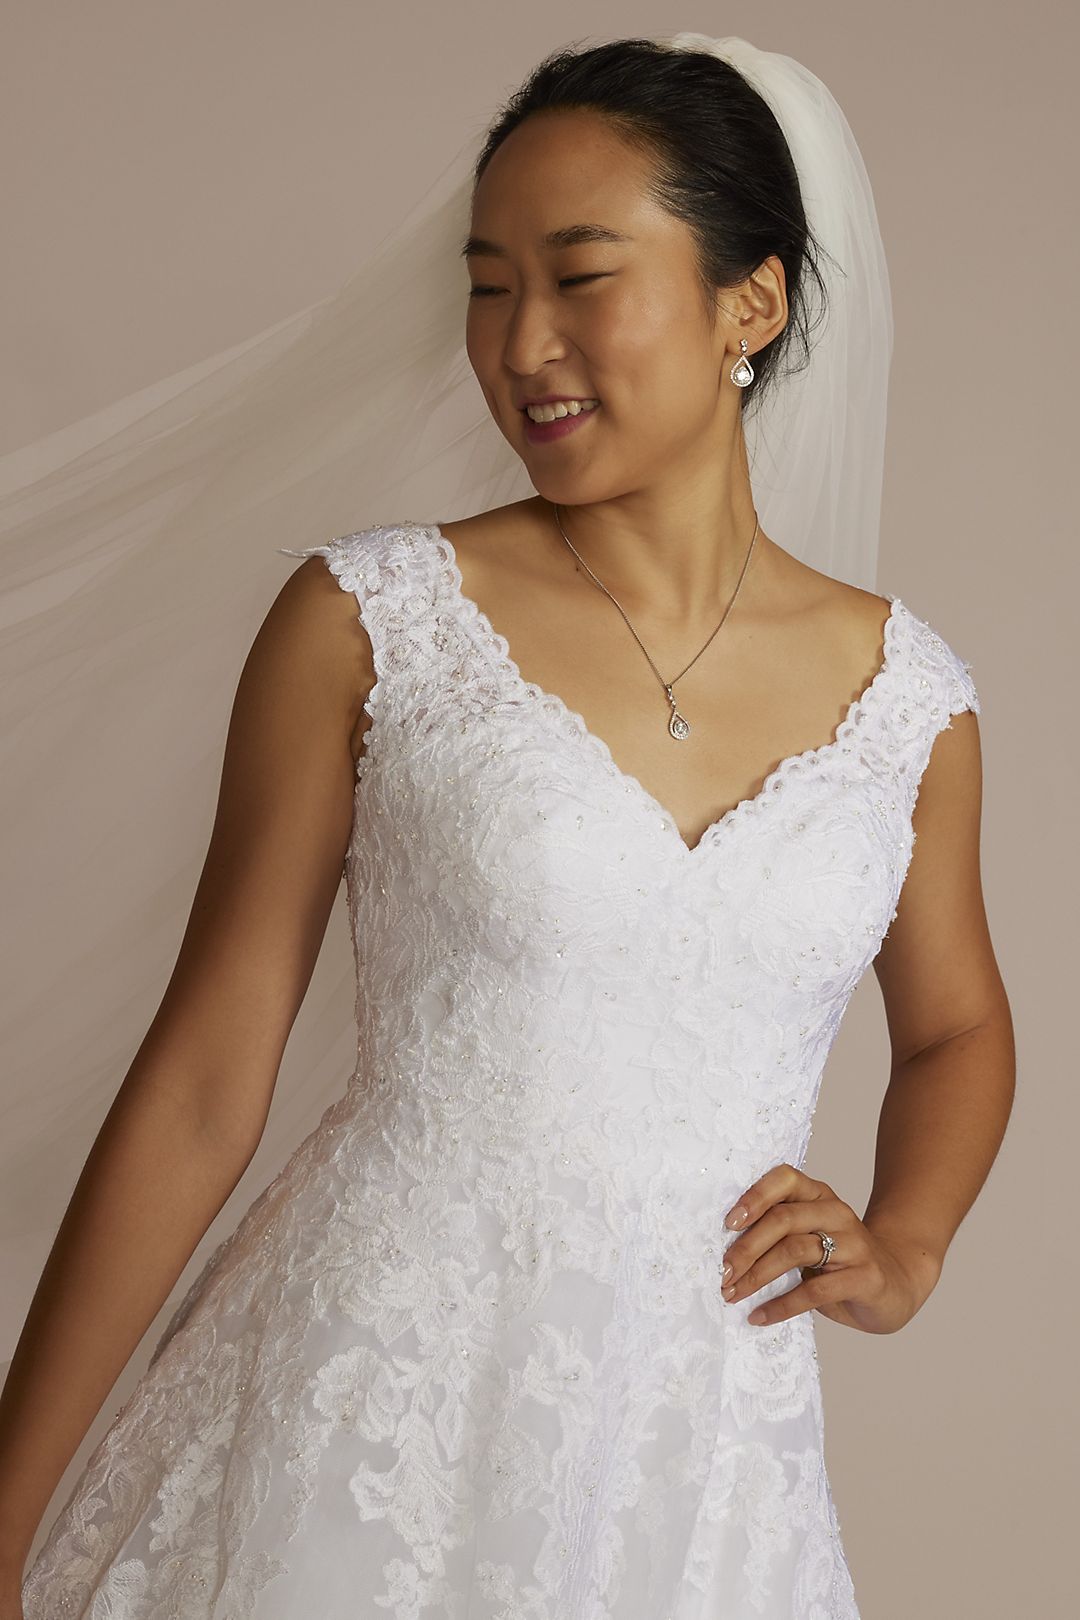 Scalloped Lace and Tulle Wedding Dress Image 3